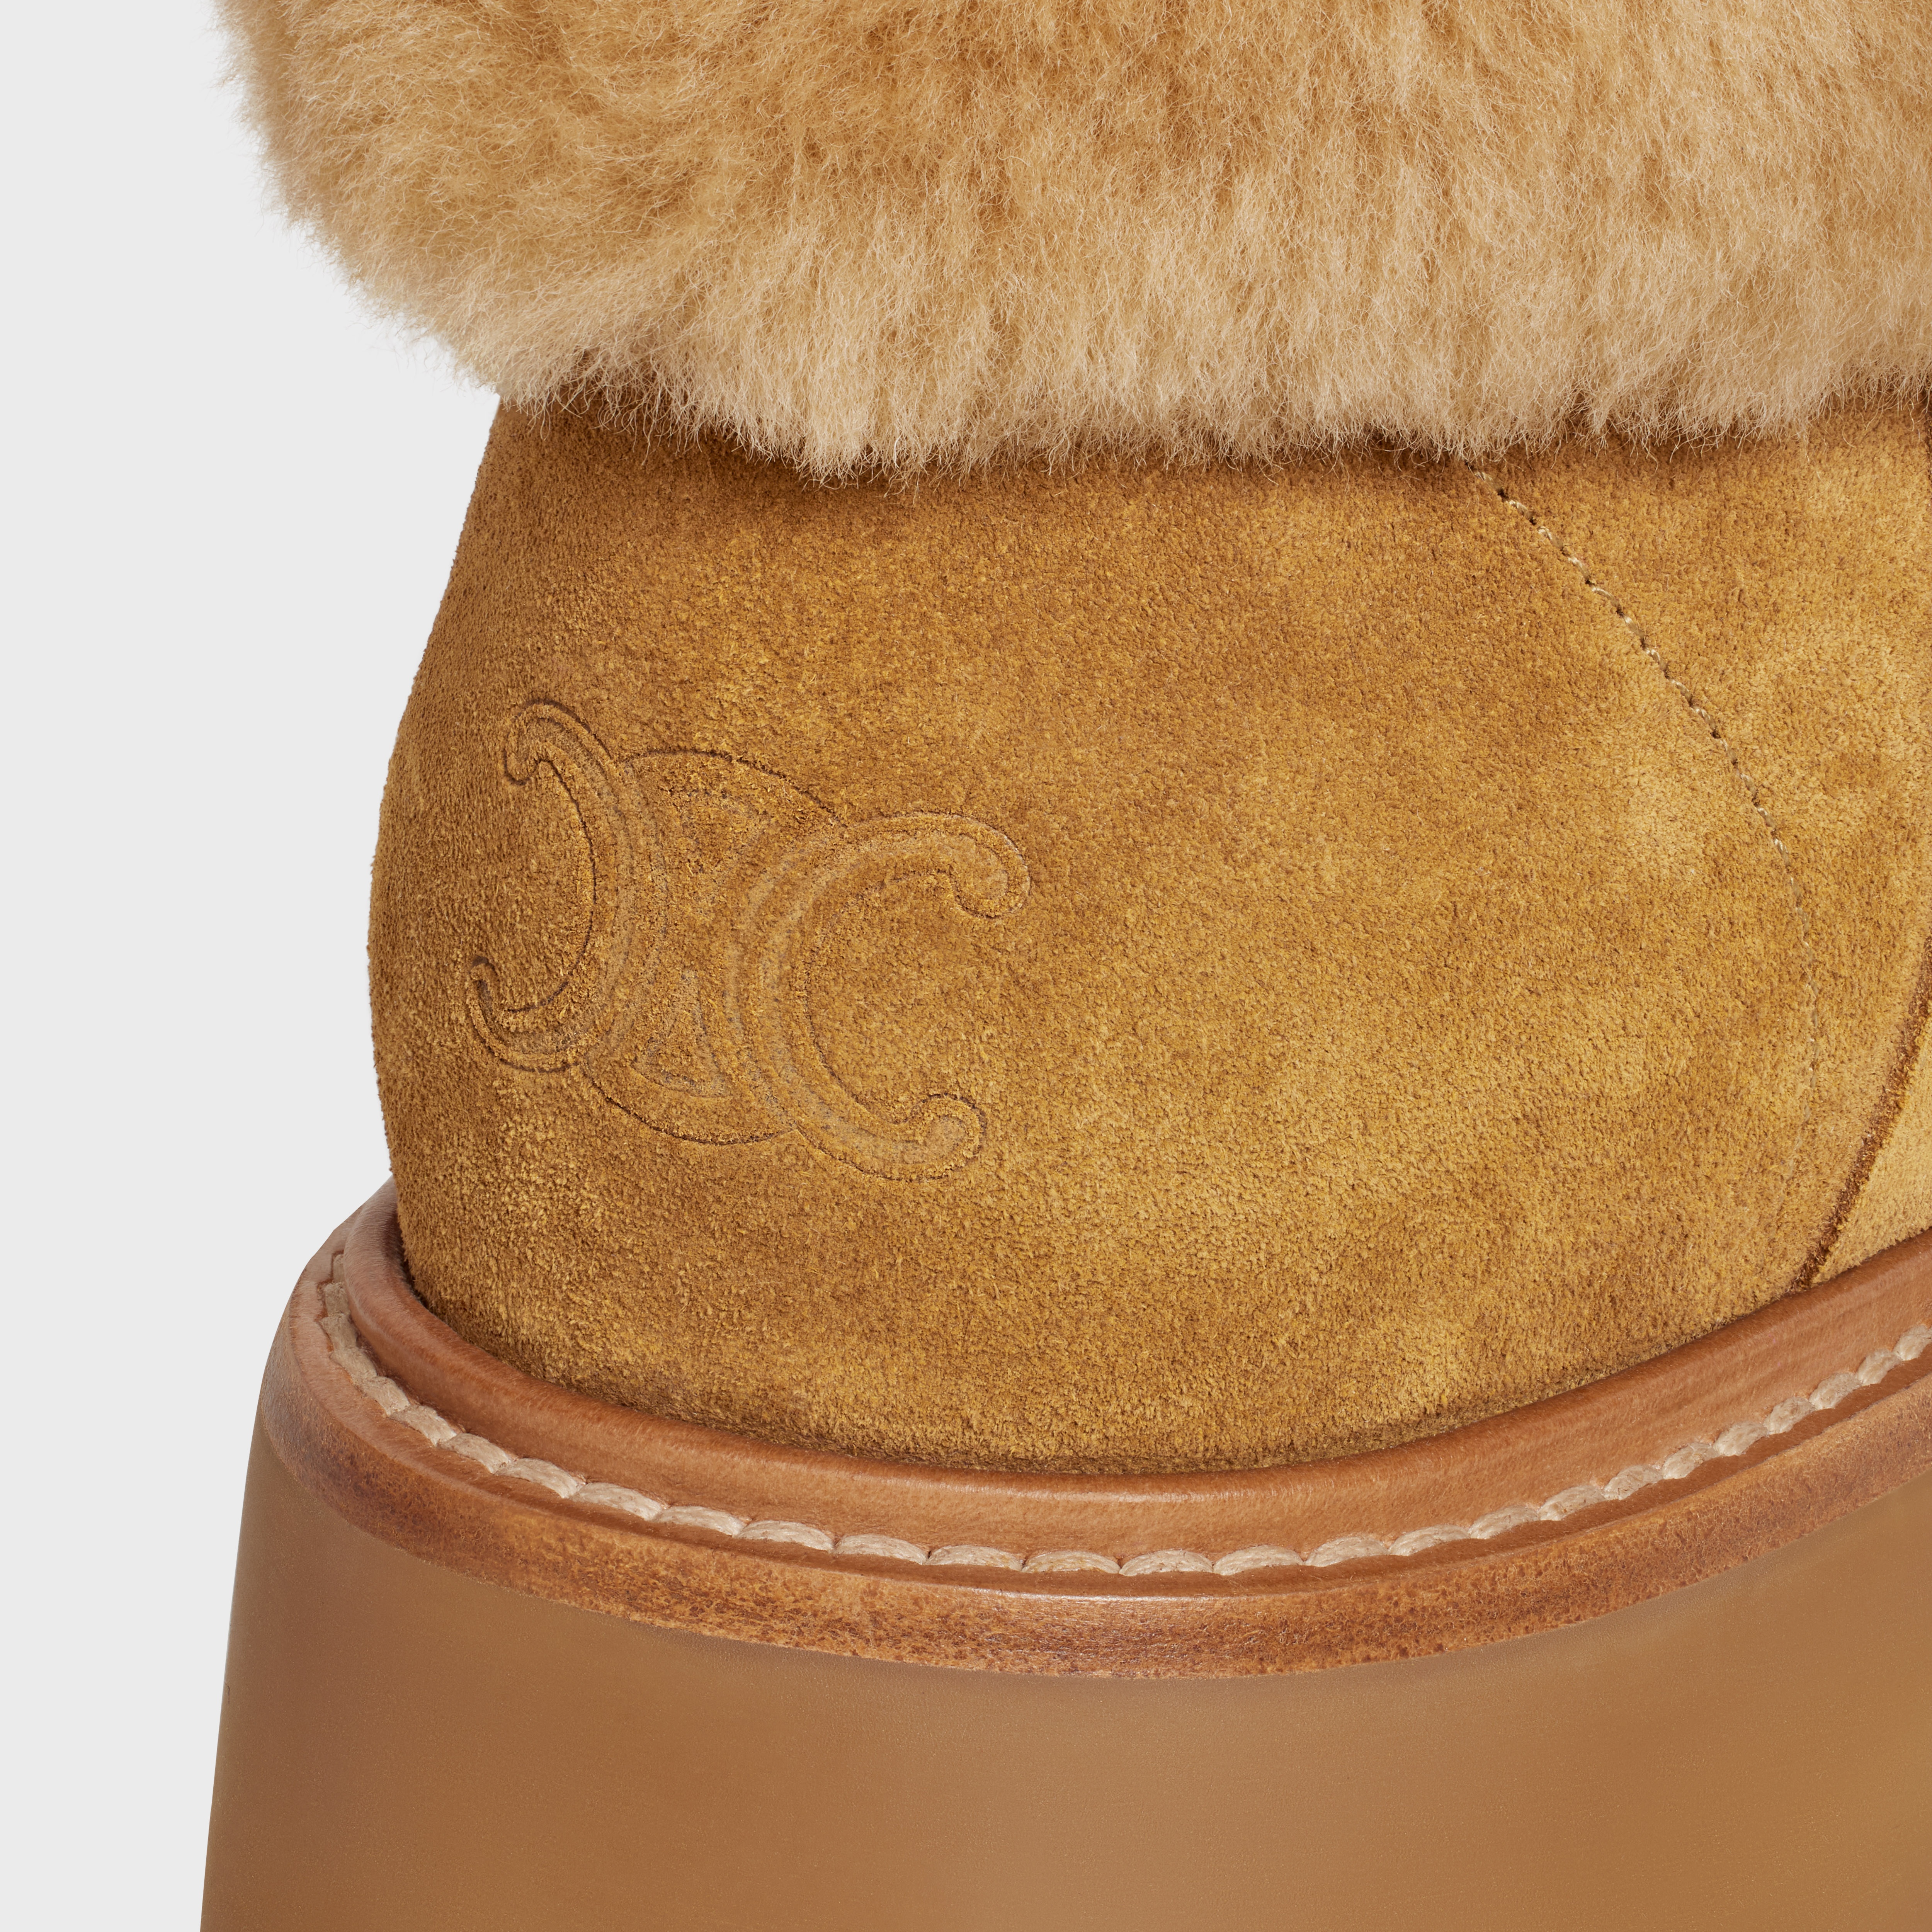 CELINE BULKY CROPPED BOOT WITH TRIOMPHE TASSELS in SUEDE CALFSKIN AND SHEARLING - 5